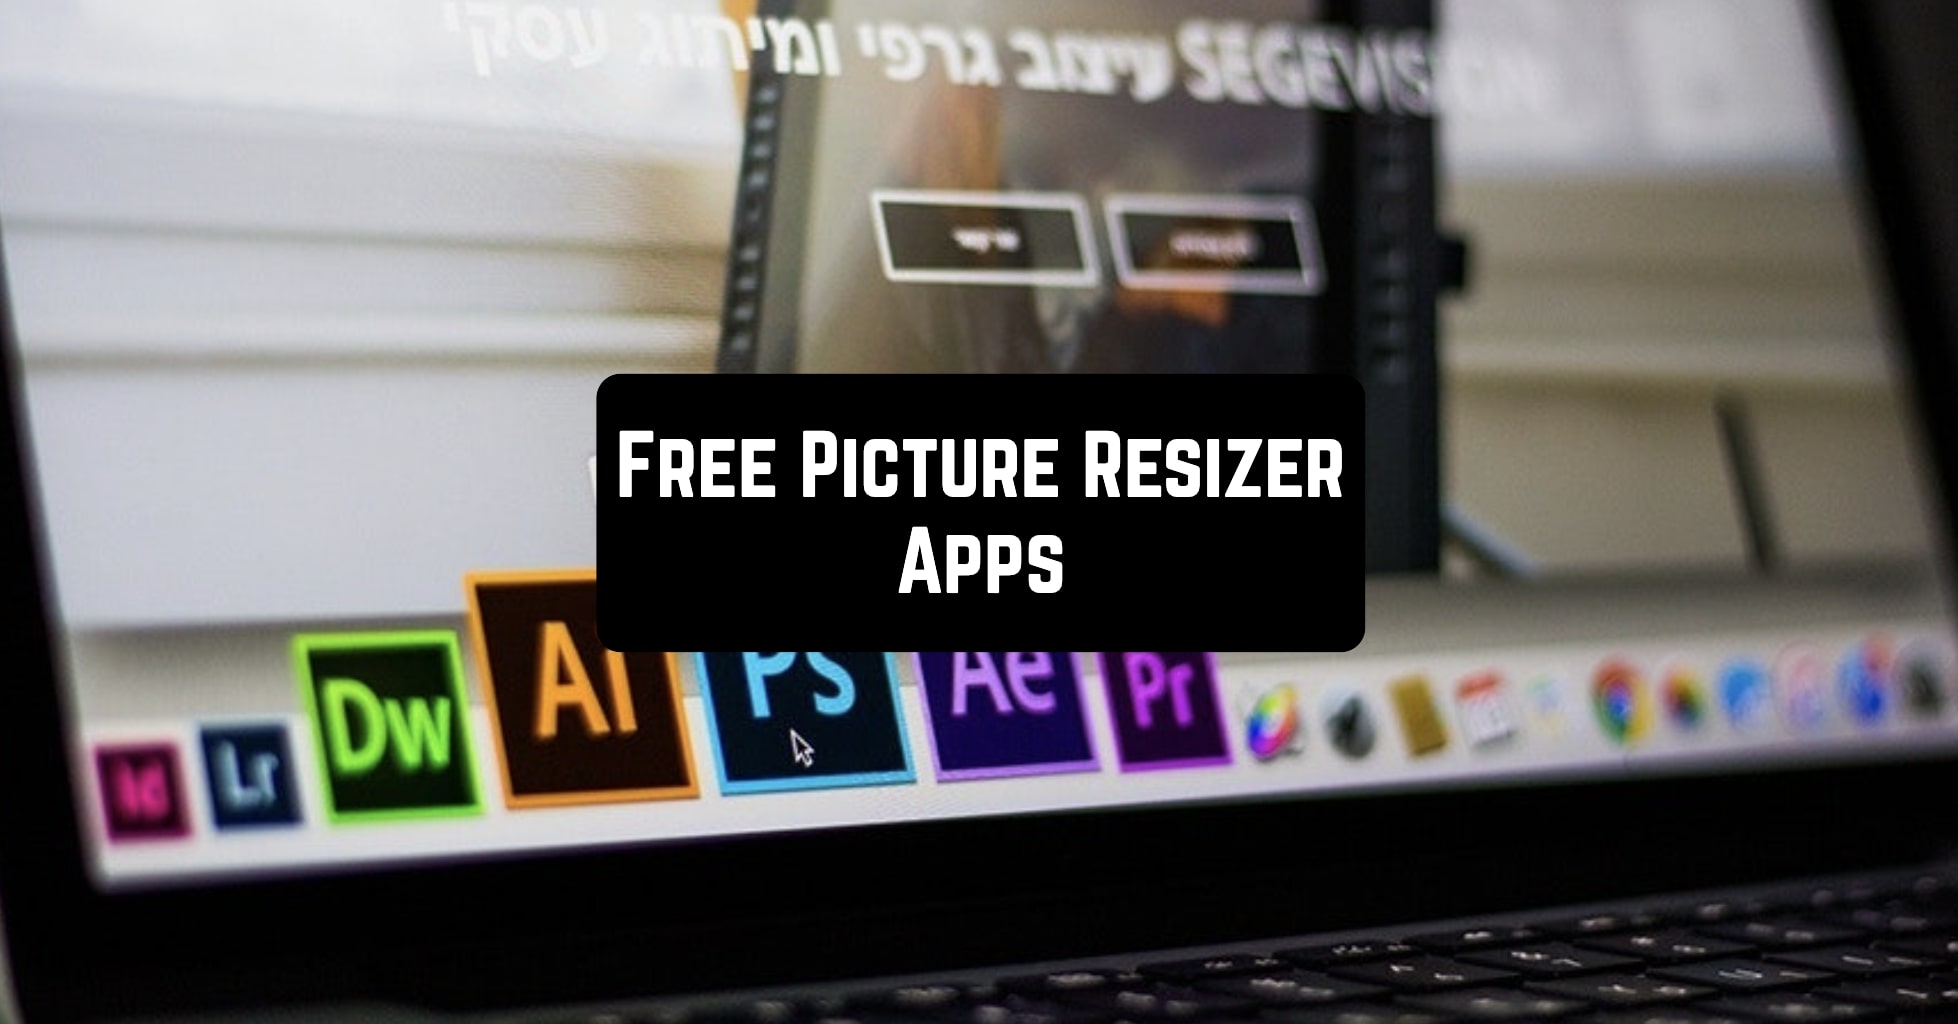 Free Picture Resizer Apps